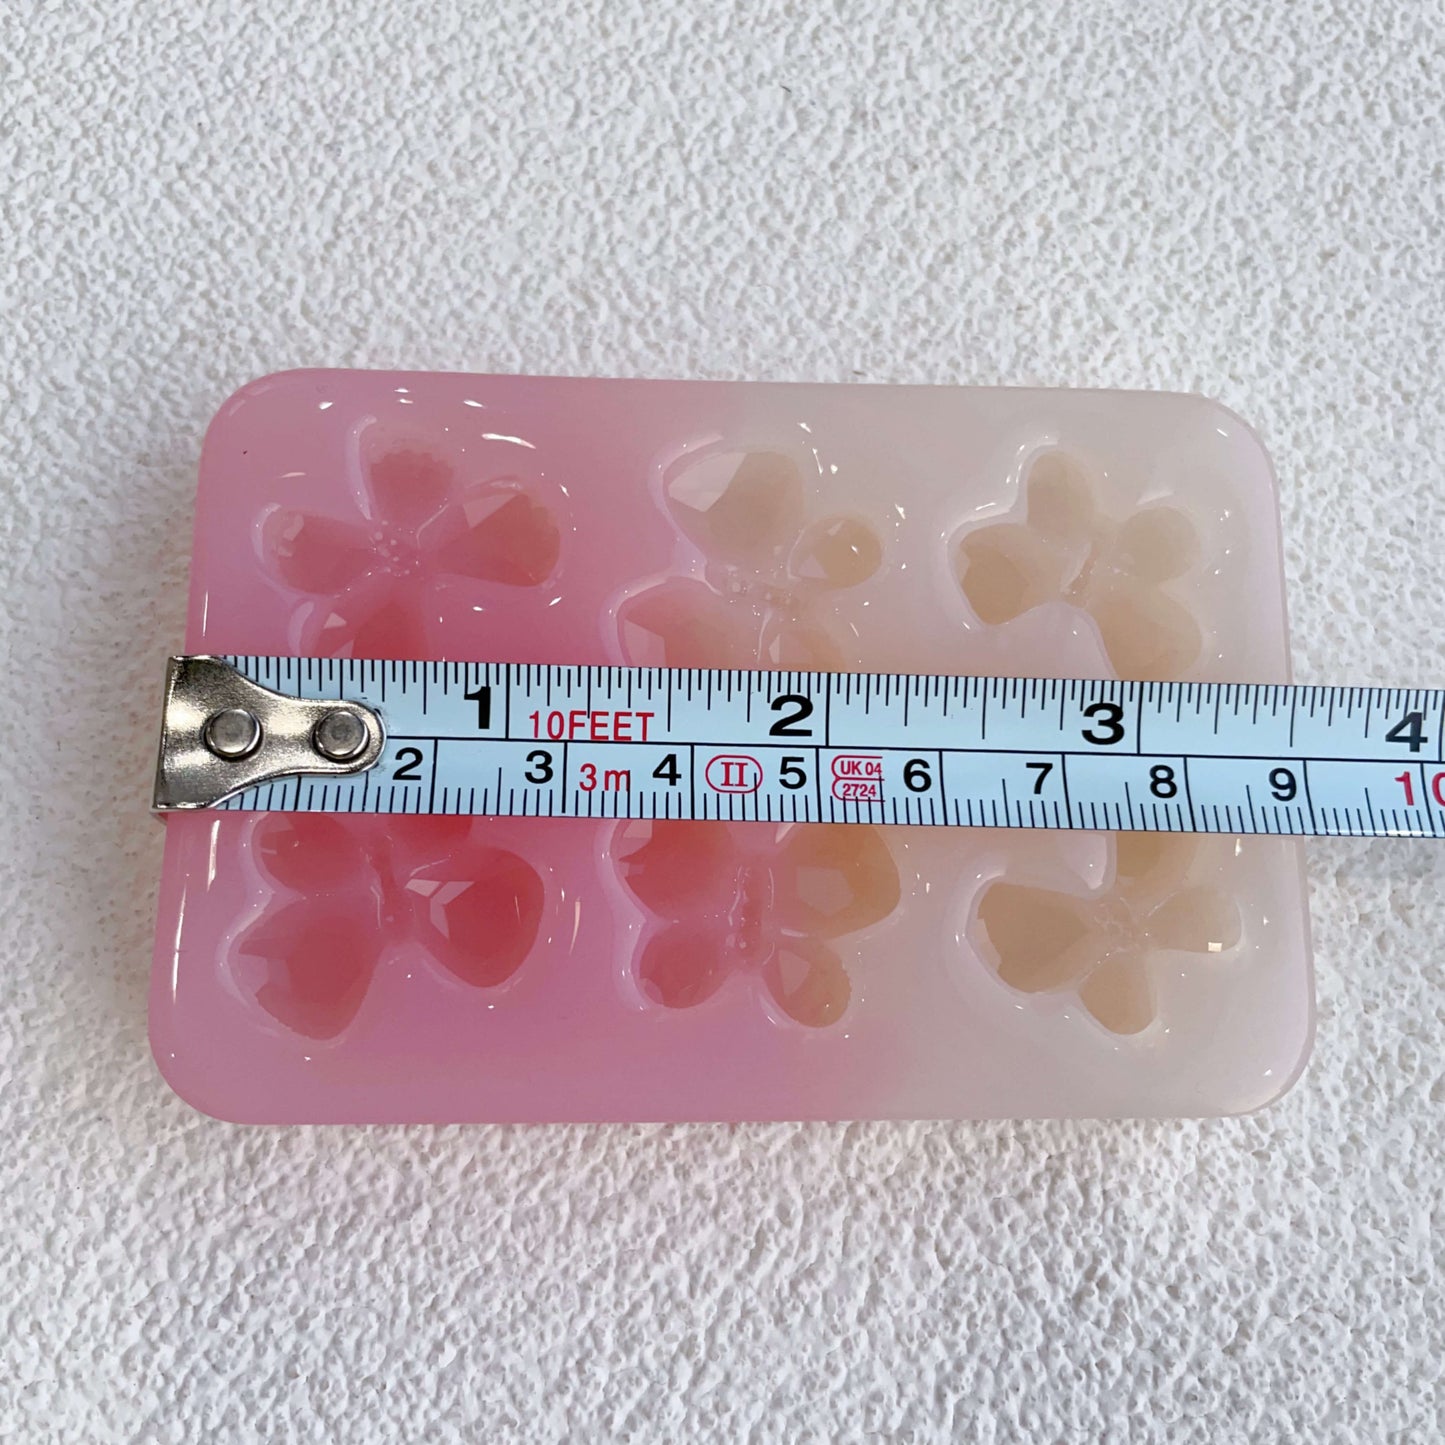 Handmade Small Butterfly Crystal Effect Resin Mold